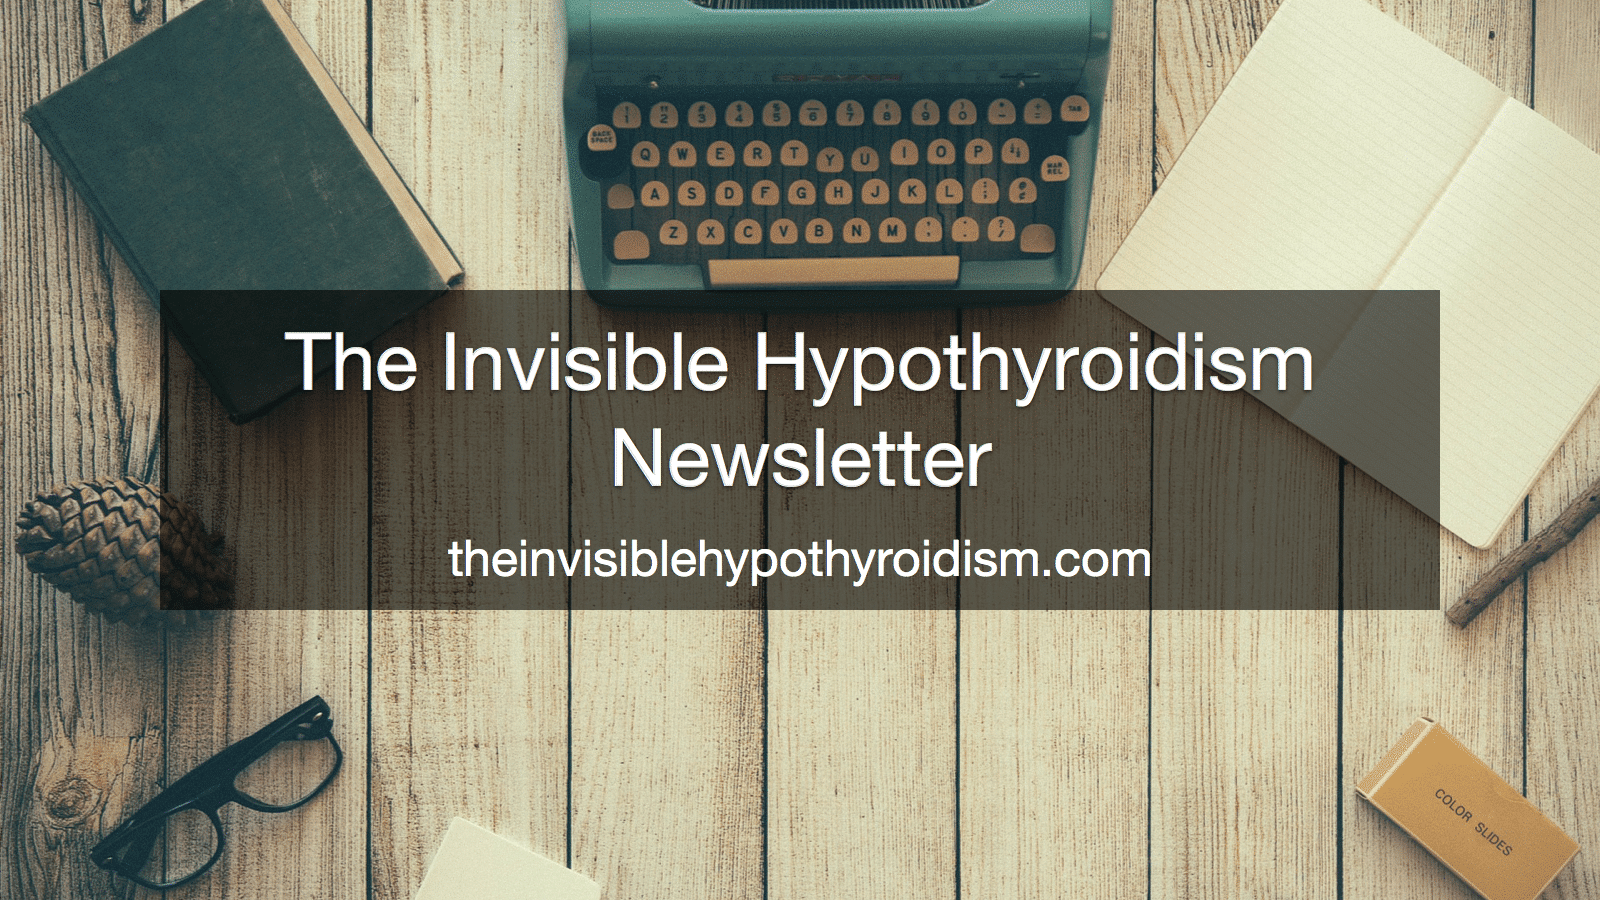 The Invisible Hypothyroidism Newsletter